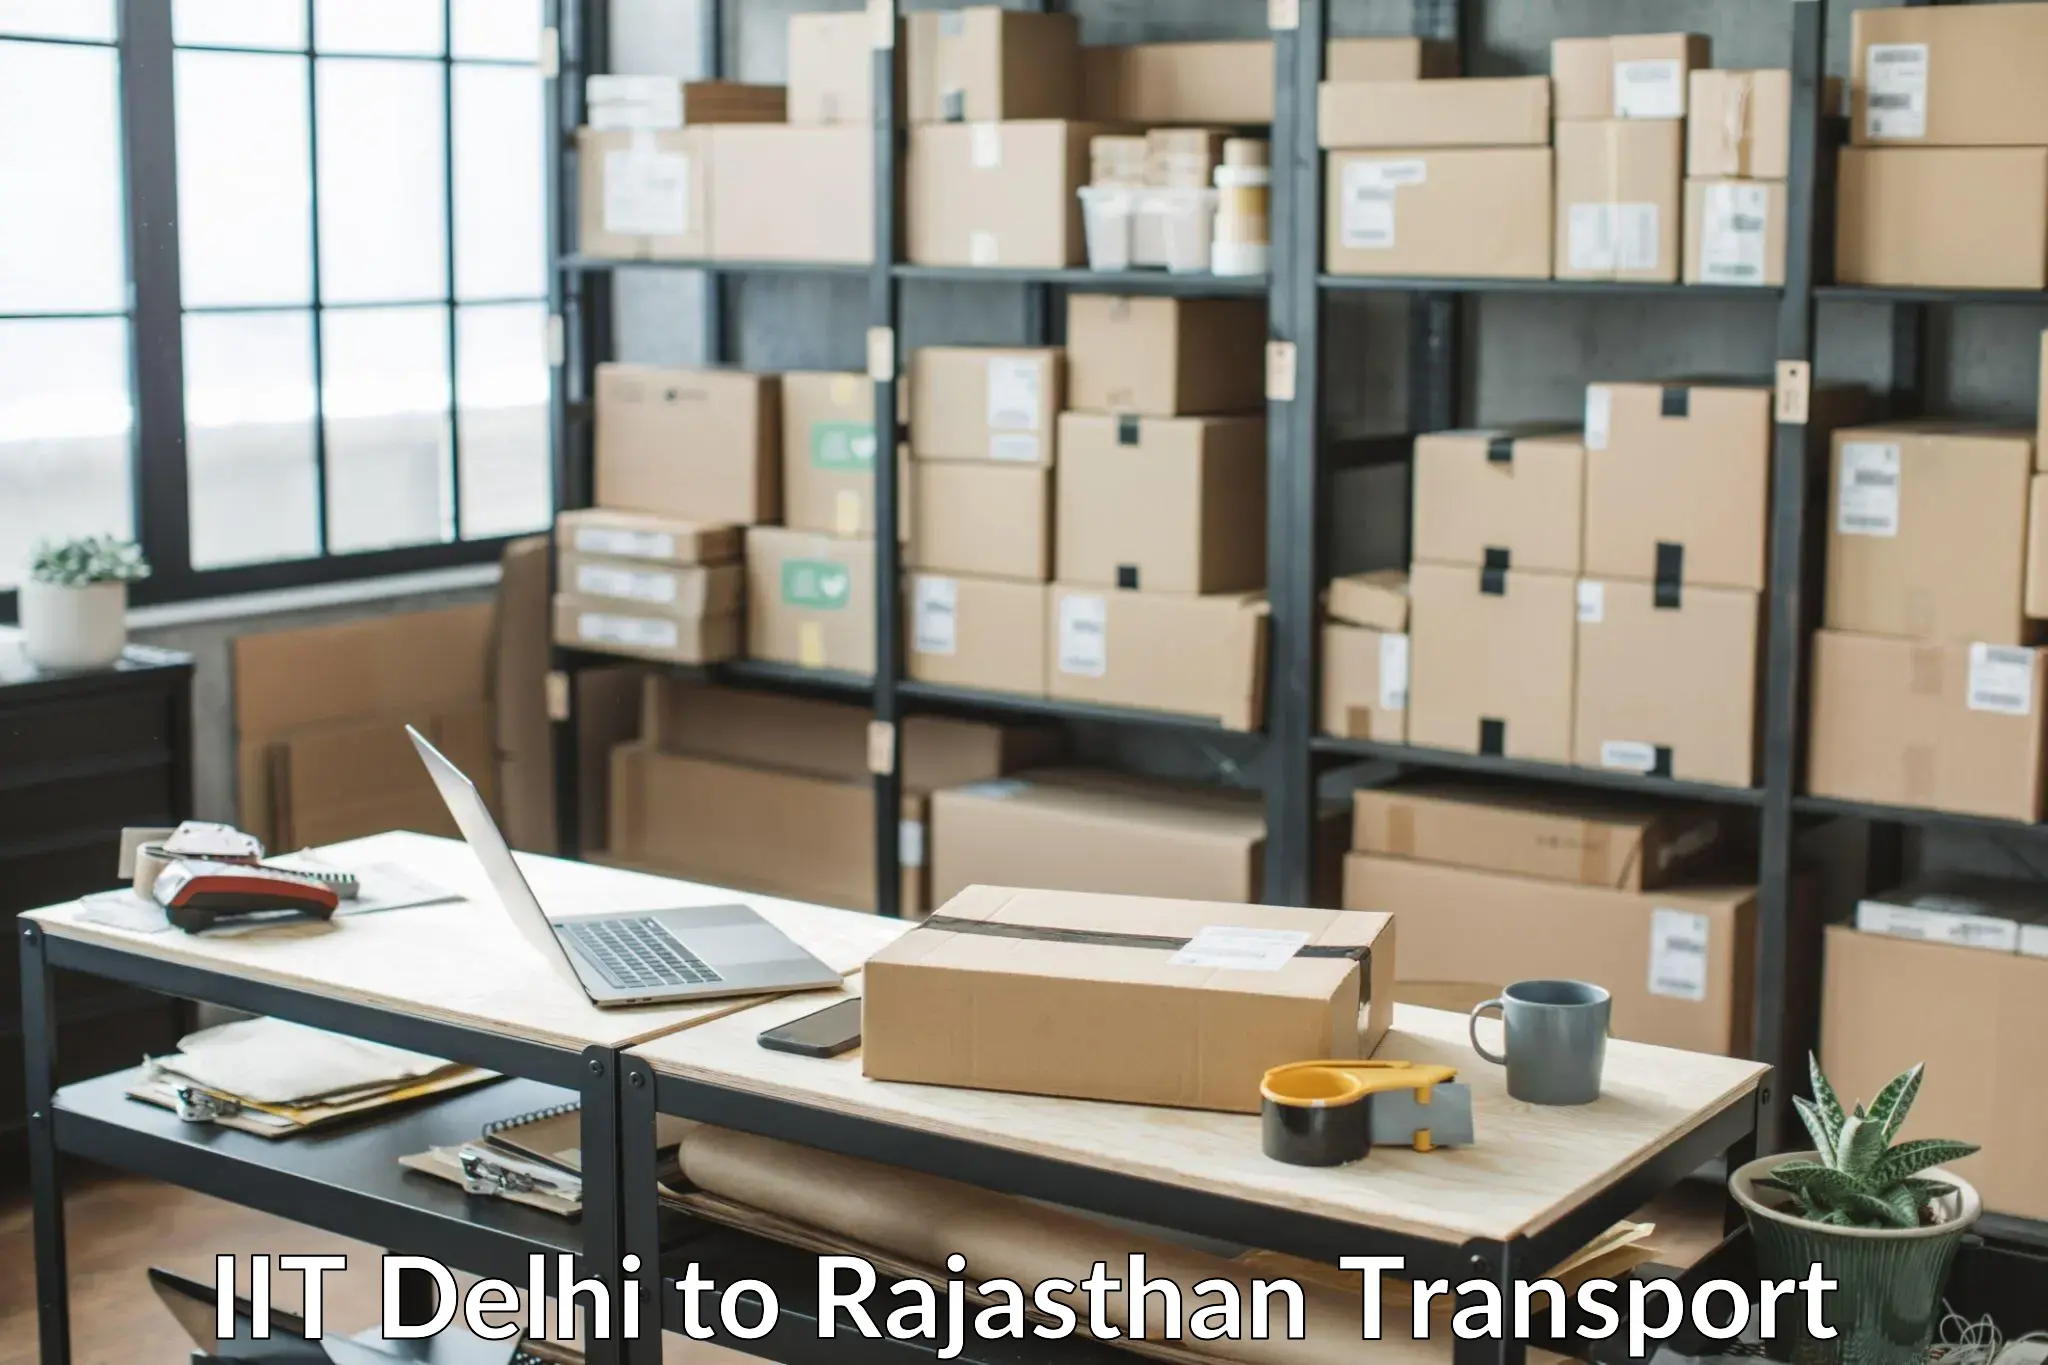 Container transport service IIT Delhi to Fatehpur Sikar